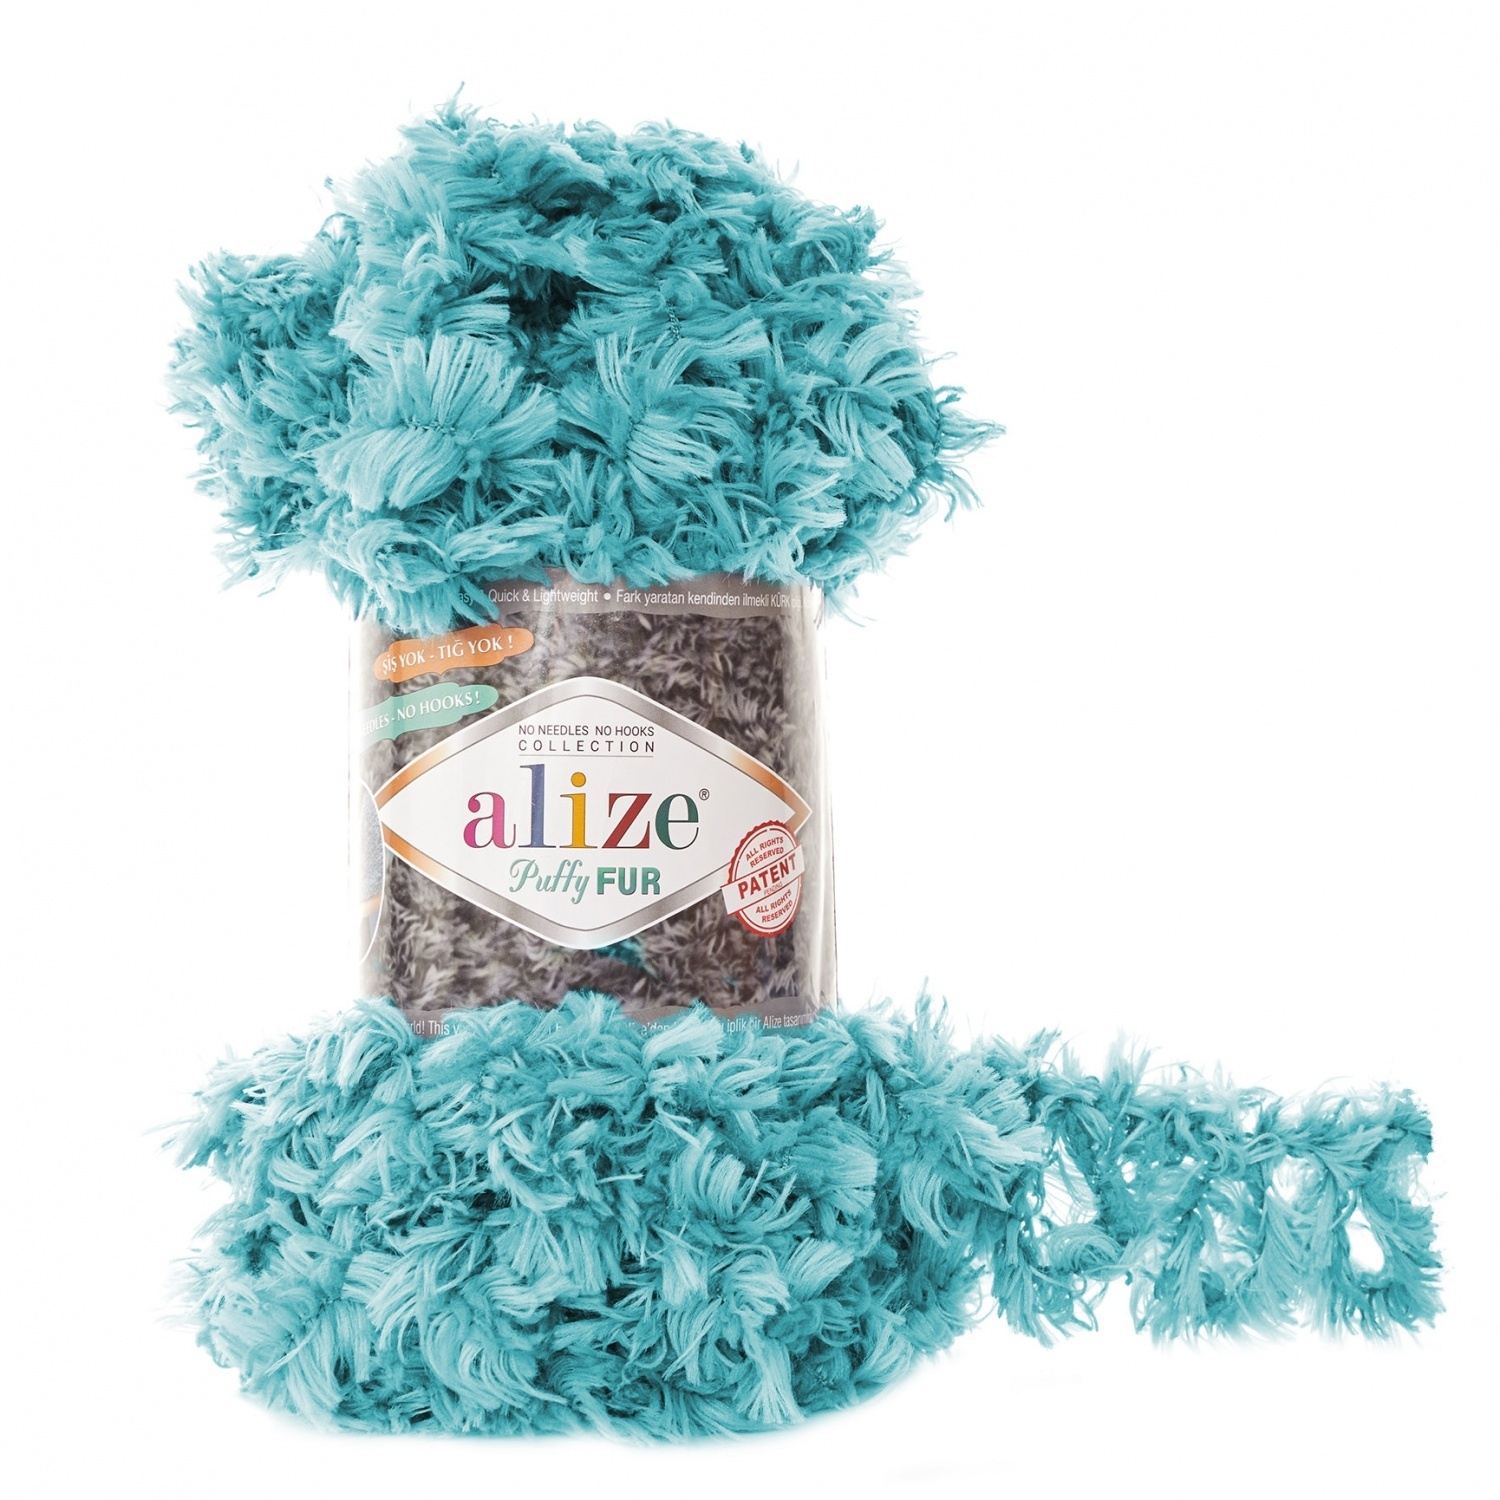 Alize Puffy Fur, 100% Polyester 5 Skein Value Pack, 500g, code APFu ALIZE